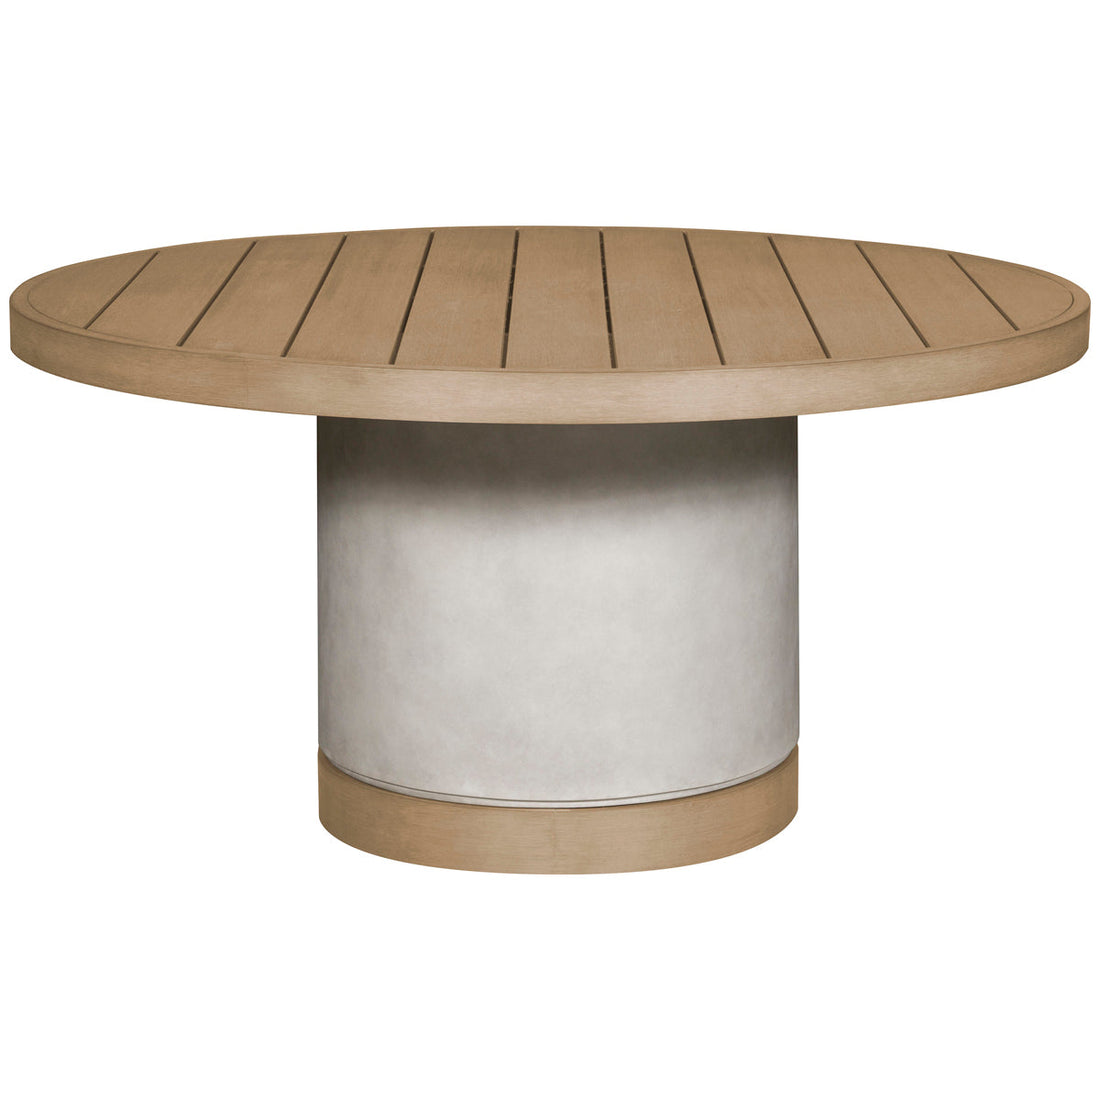 Vanguard Furniture Tiburon Round Dining Table with Hole